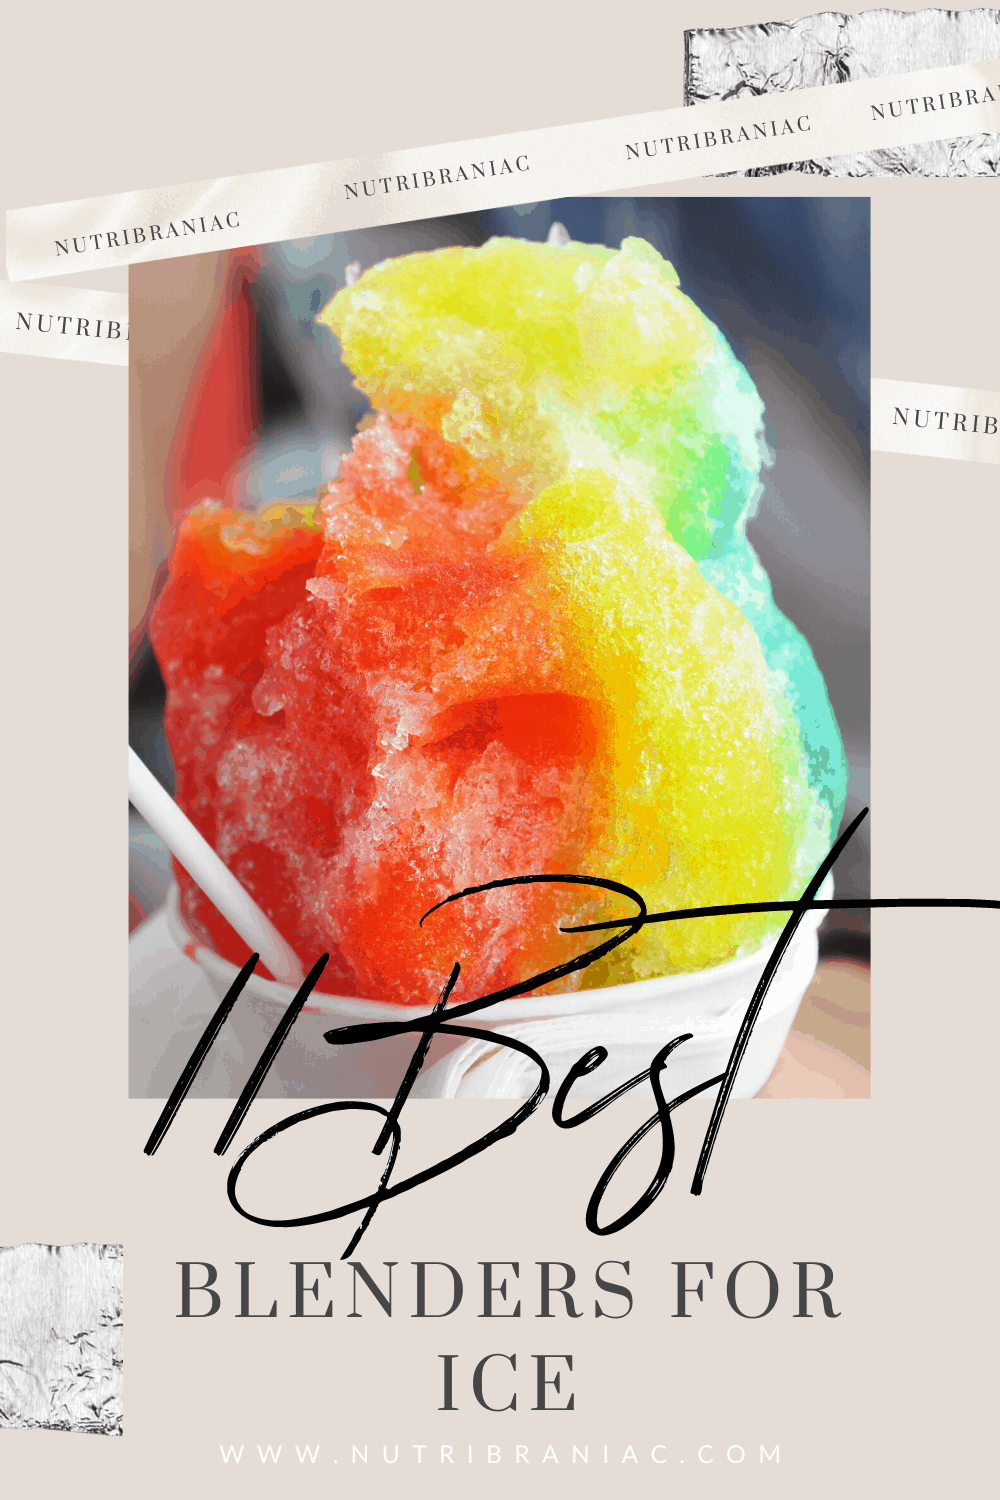 Graphic pinnable image of rainbow-colored shaved ice with text overlay "11 Best Blenders for Ice"